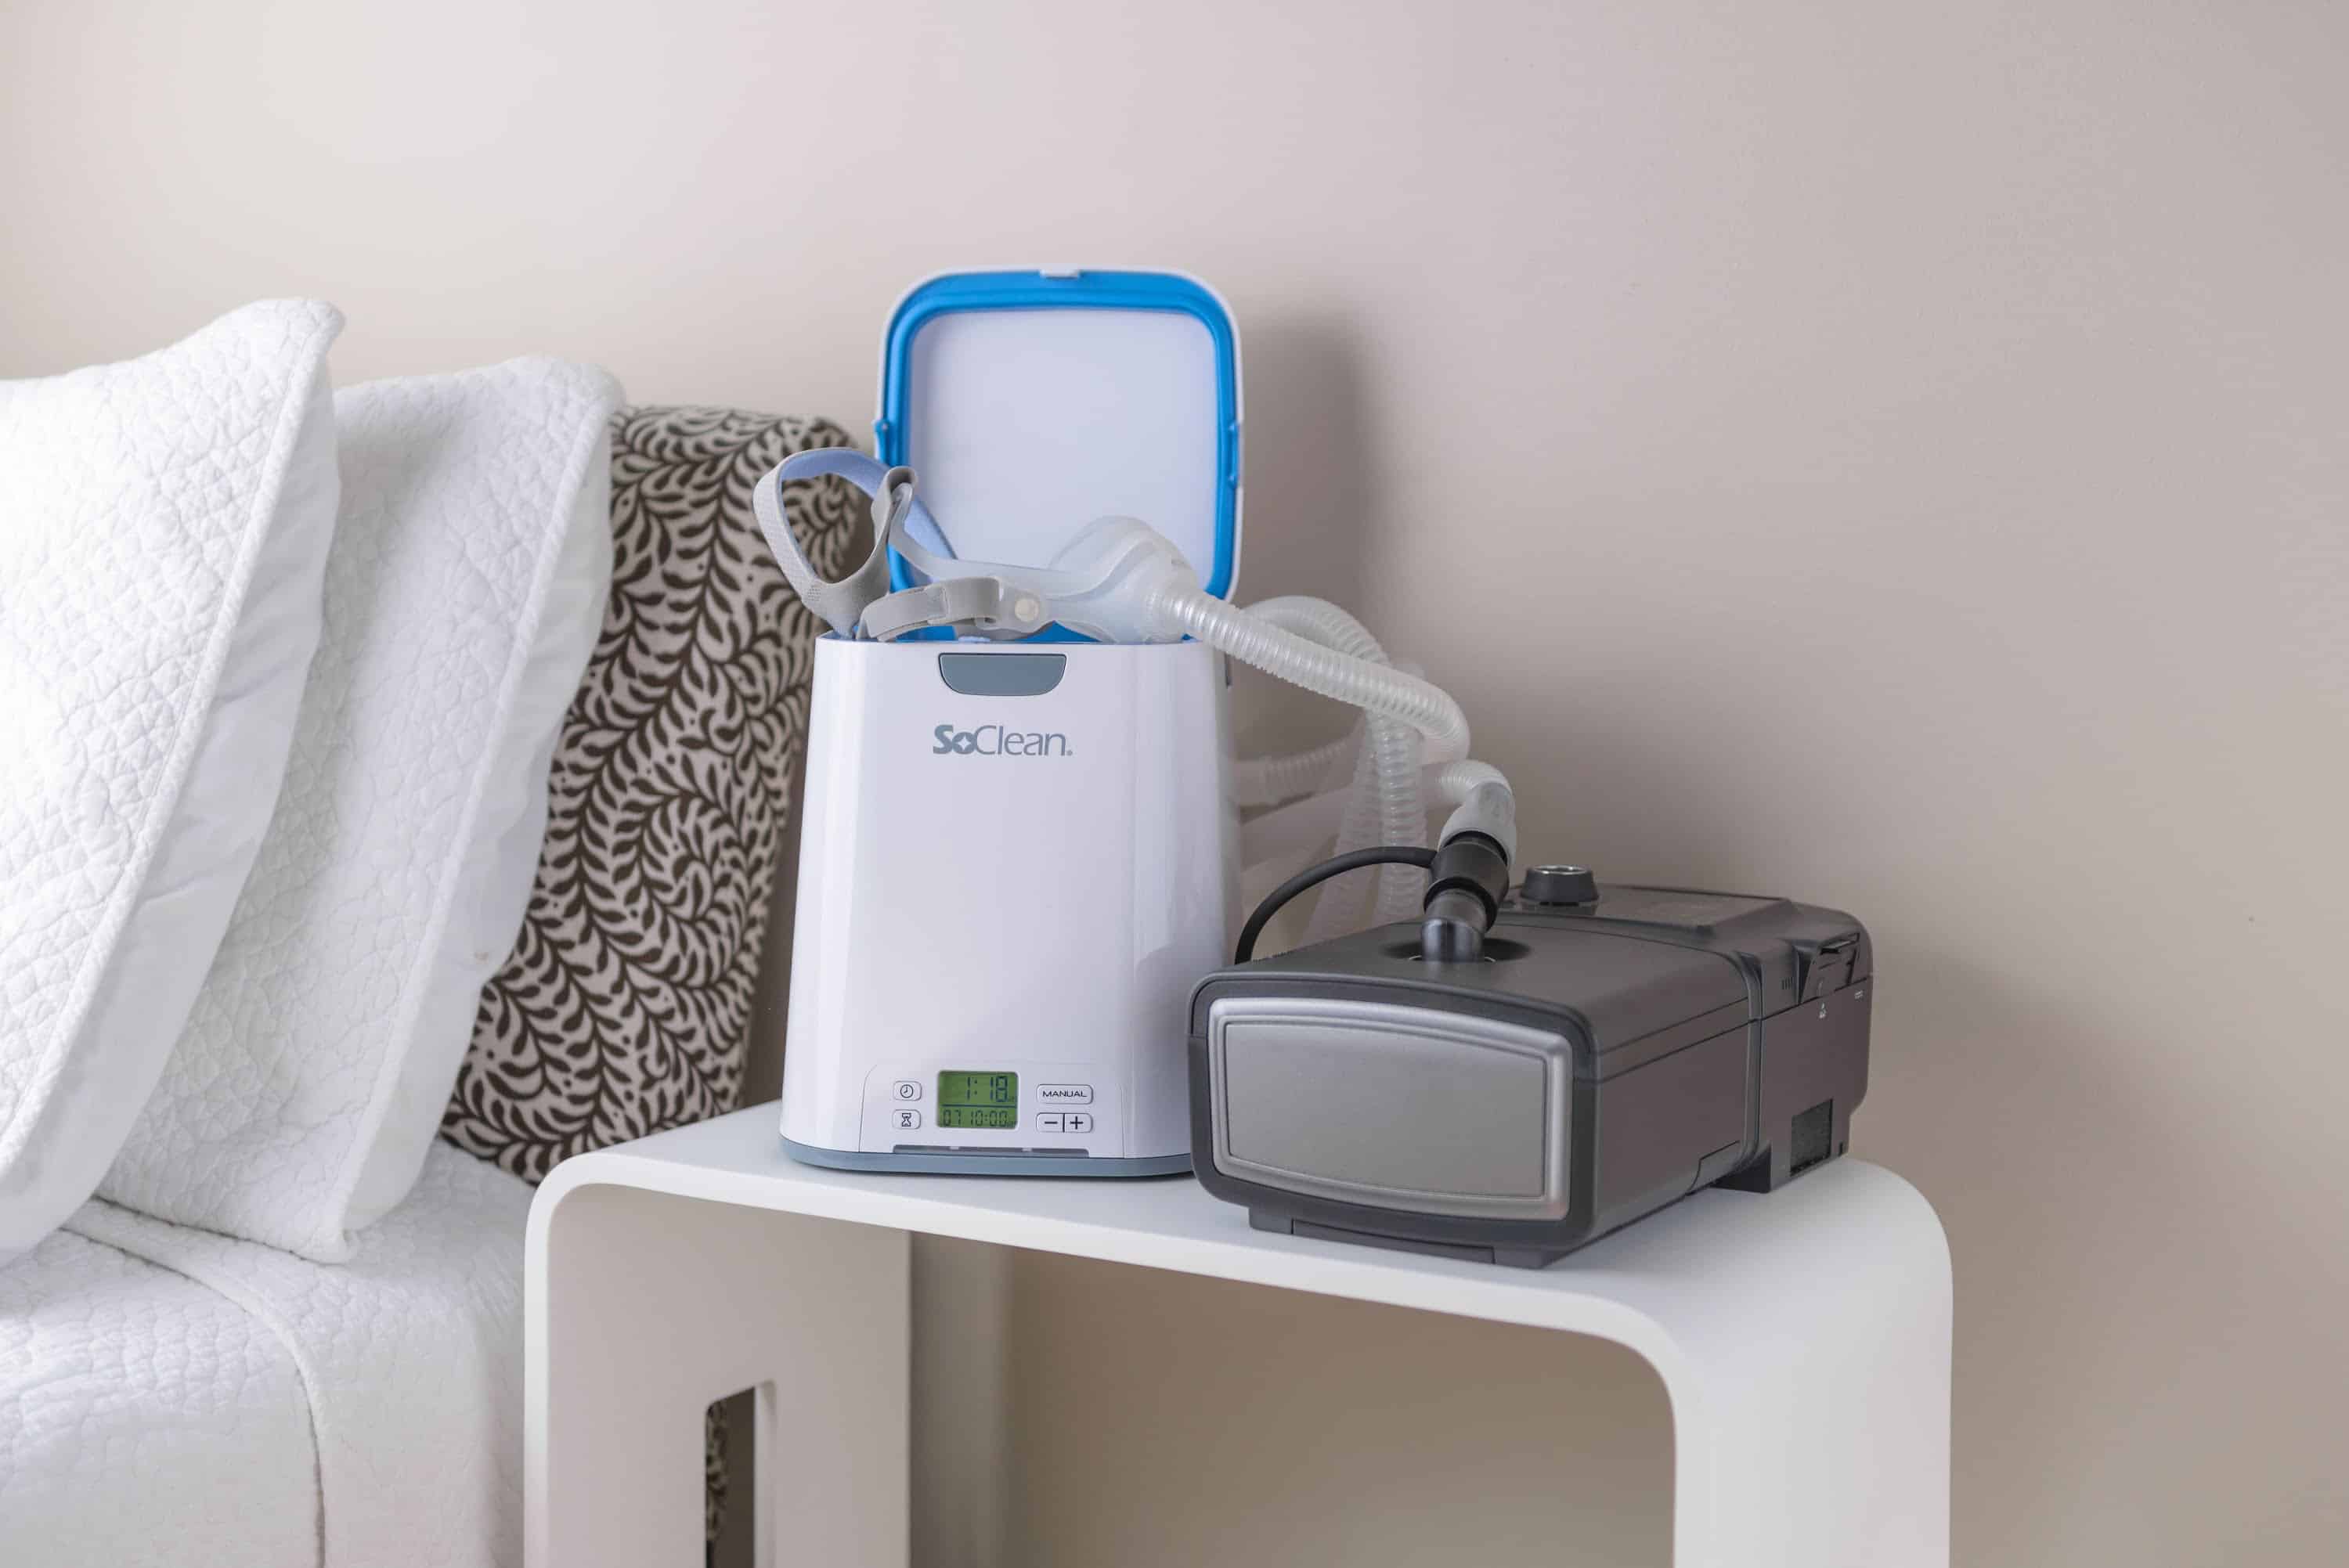 Review of the SoClean 2 CPAP Cleaner